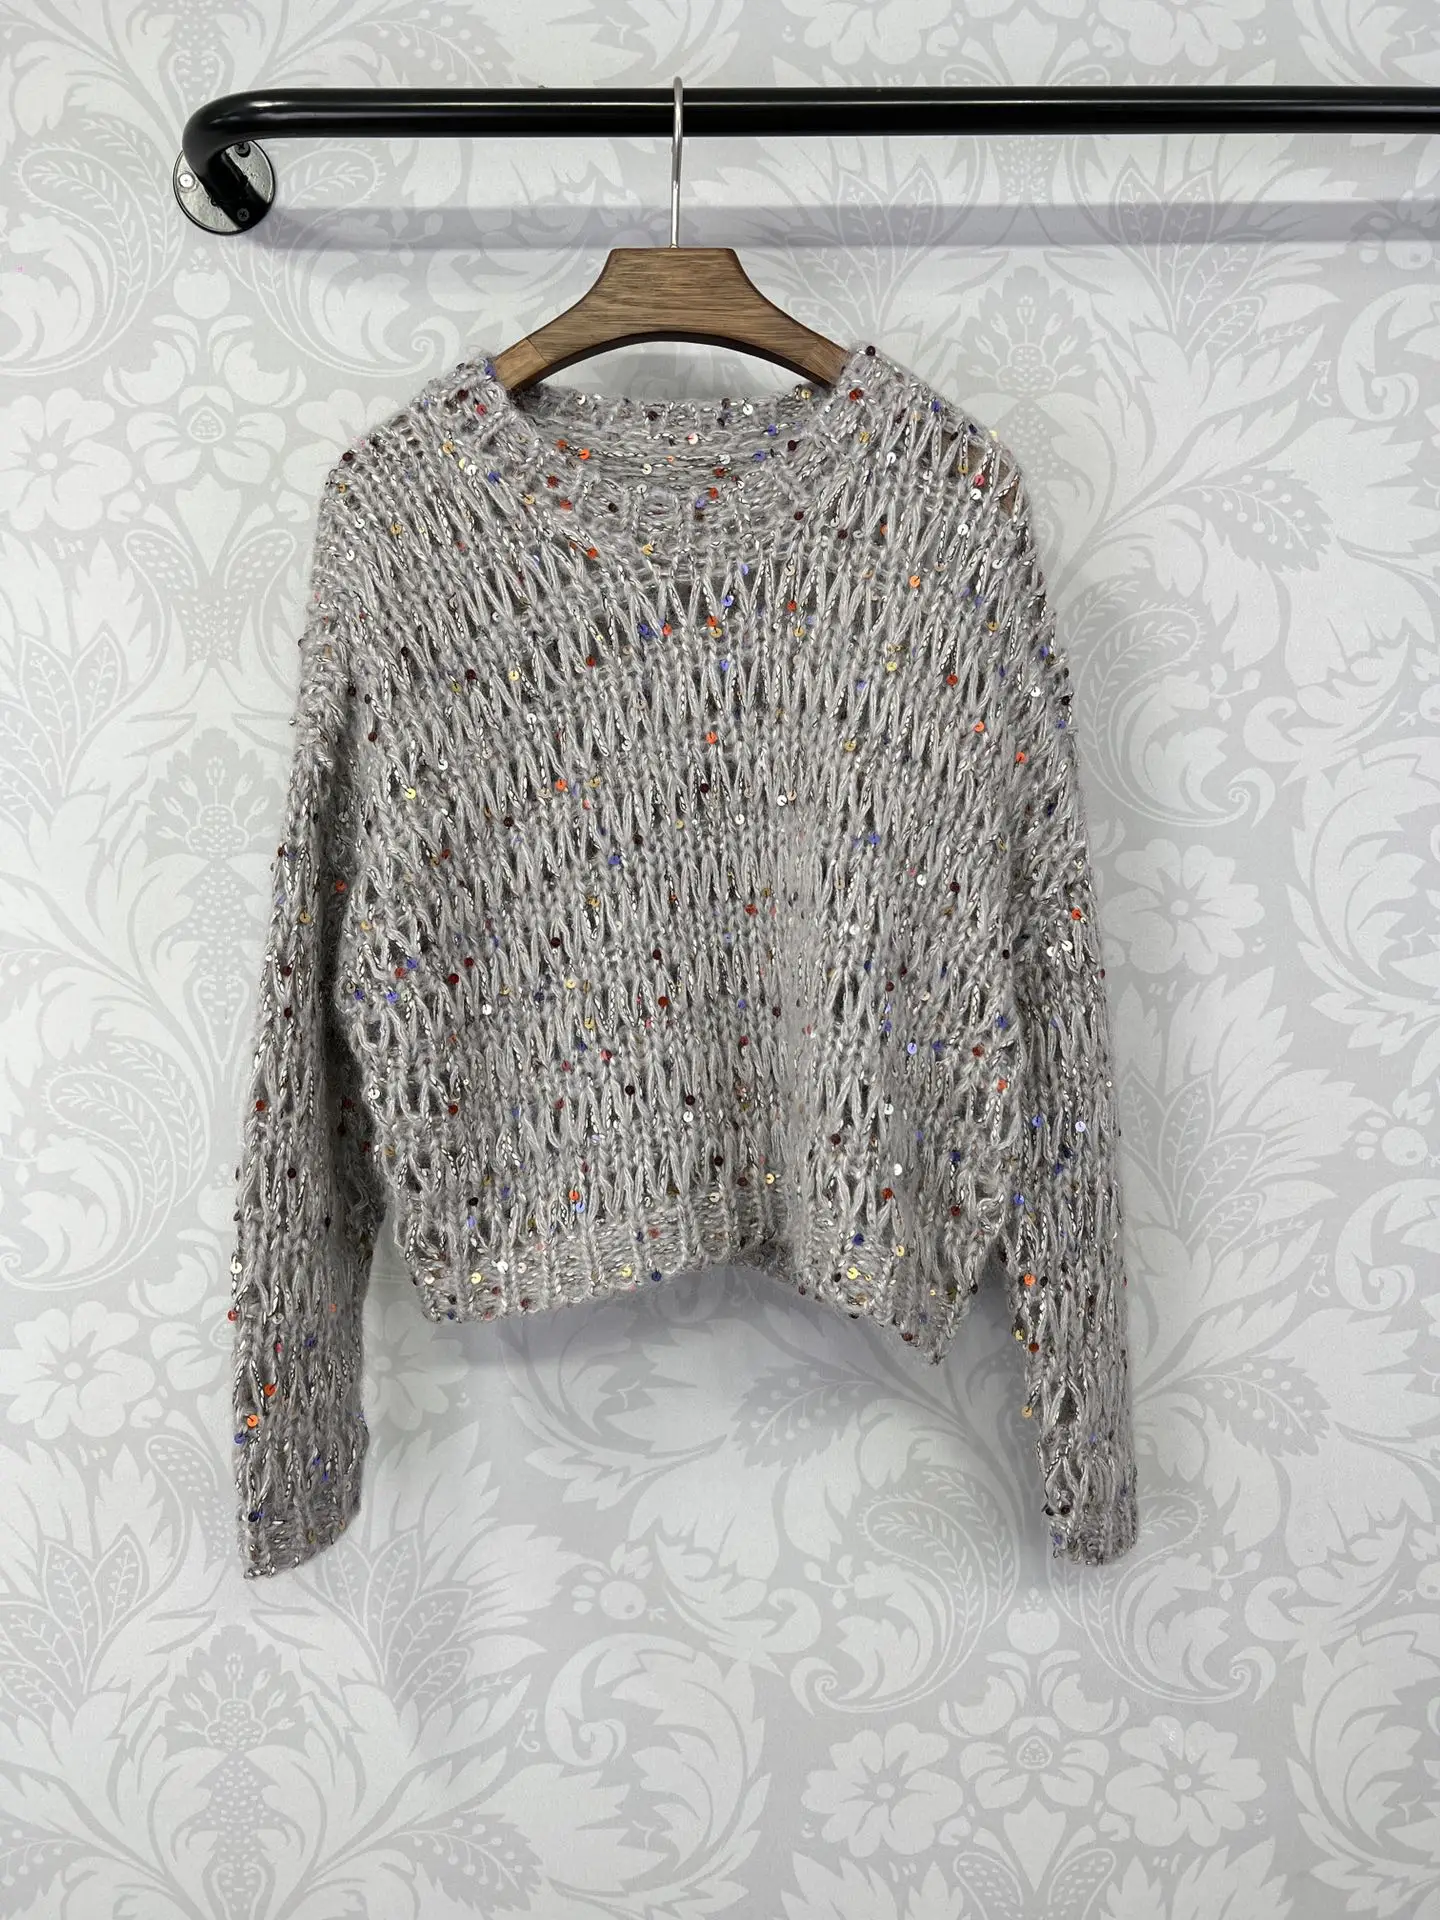 

Women's Clothing crochet weave sparkly beaded embroidered sweater Autumn Winter New NO.7